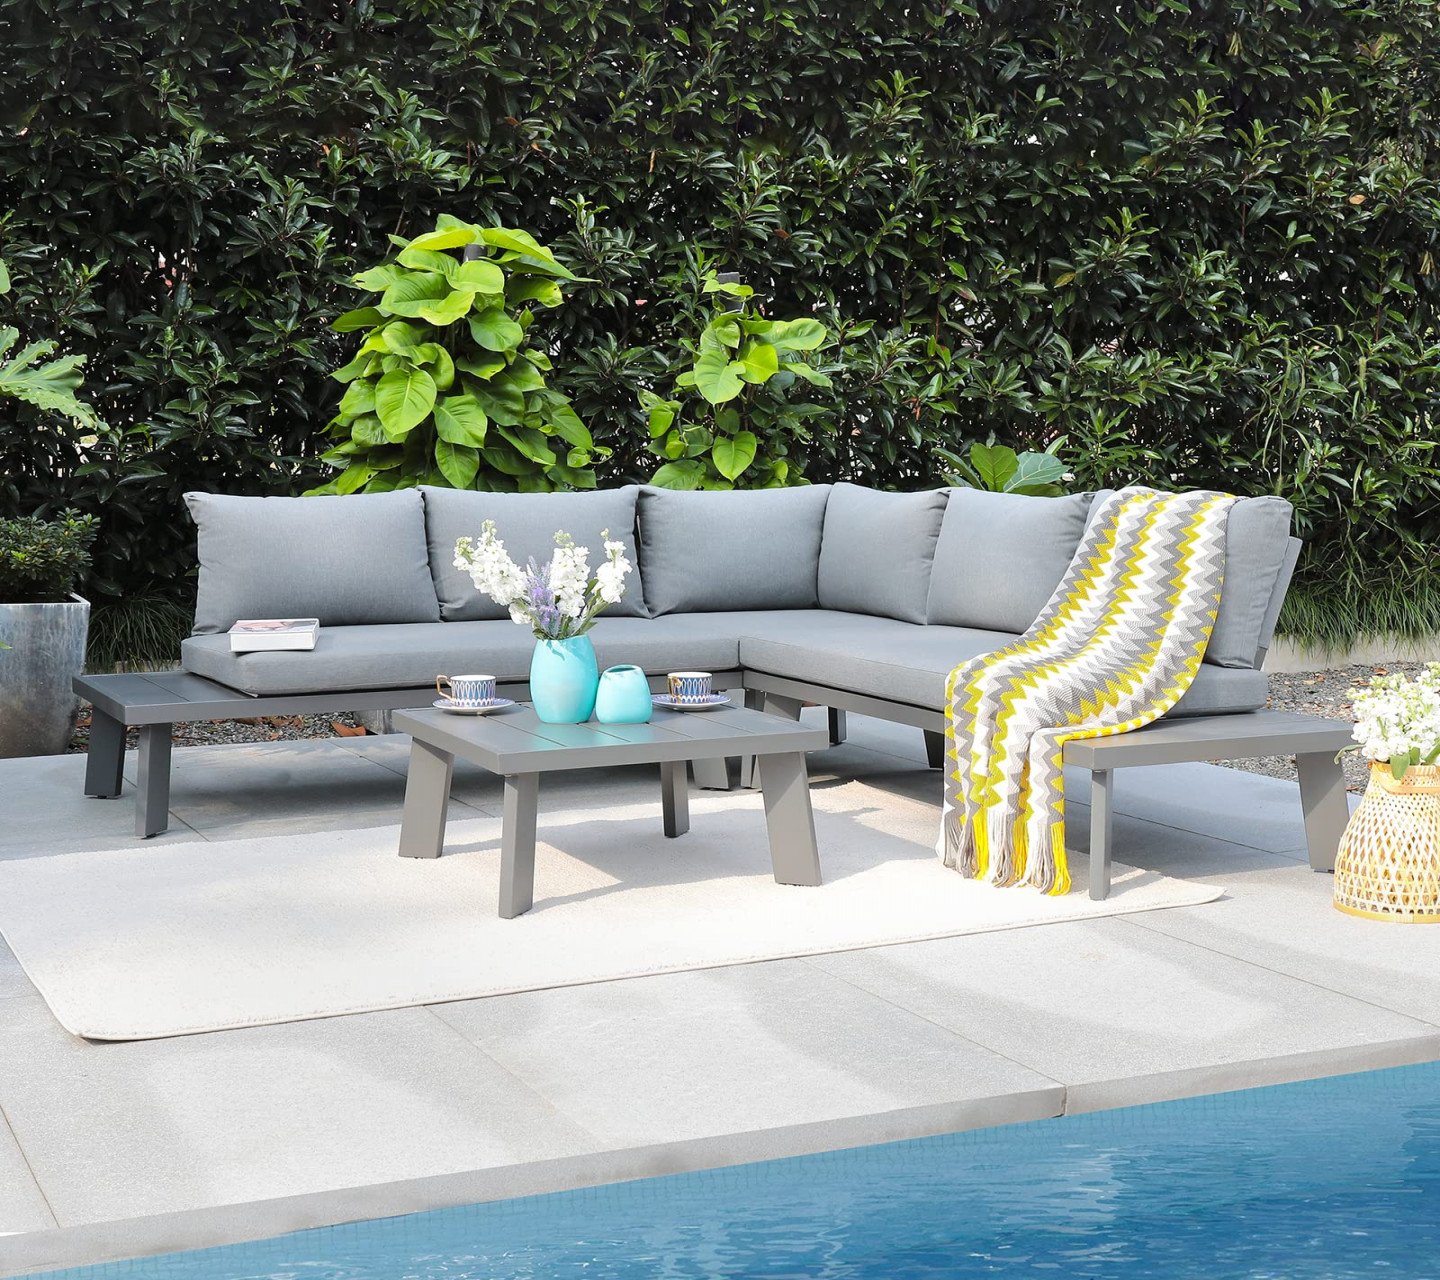 Soleil Jardin -Piece Outdoor Patio Furniture Set L-Shaped Aluminum  Sectional Sofa with Coffee Table All-Weather Patio Conversation Set with  Cushions,